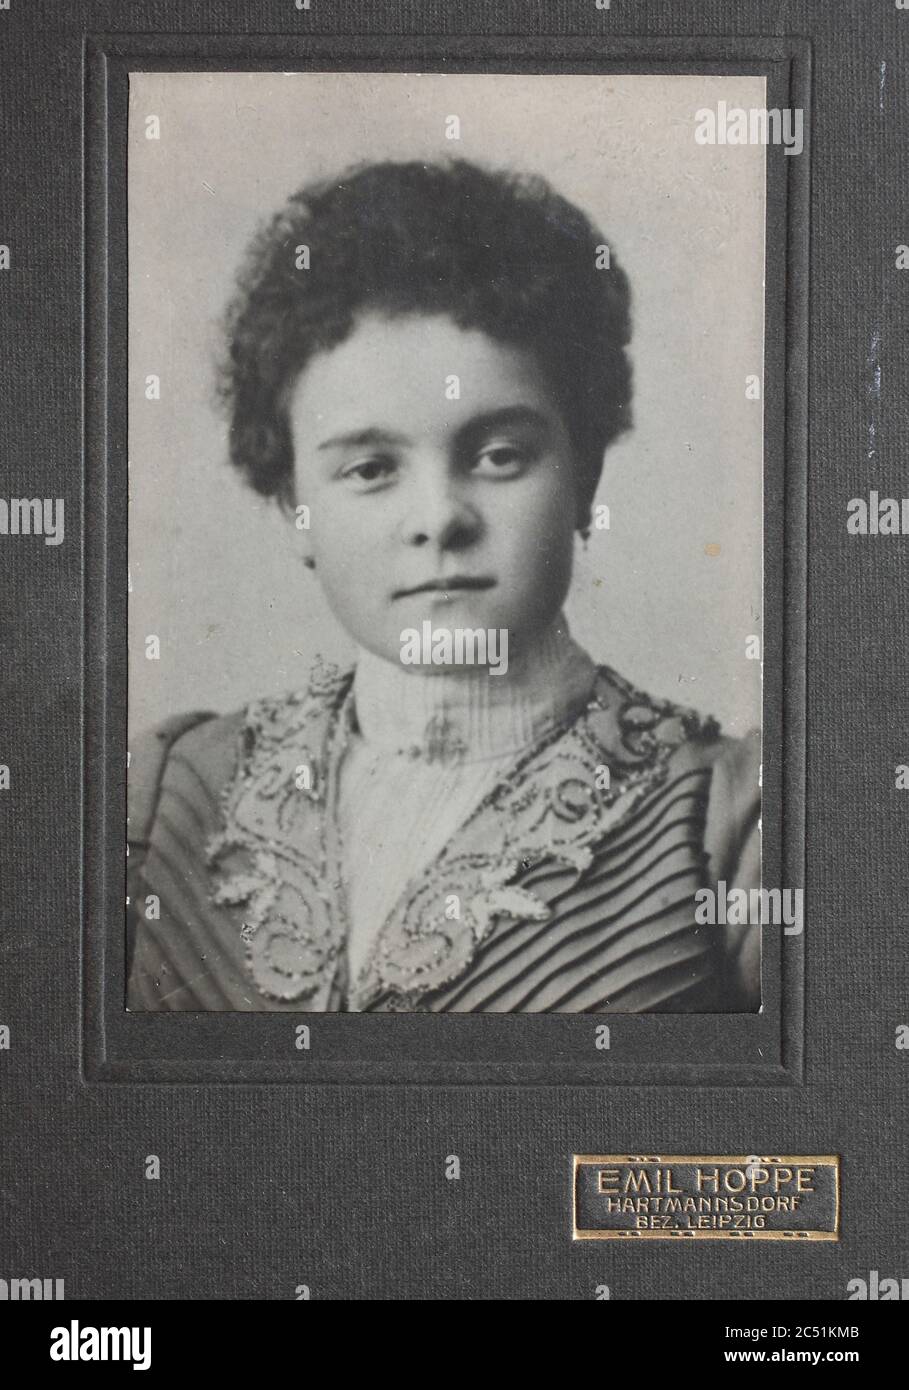 Frau, Carte de visite, a type of small photograph which was patented in 1854, each photograph was the size of a visiting card, and such photograph cards were commonly traded among friends and visitors in the 1860s  /  Visitformat, Carte de Visite, auf Karton fixierte Fotografie im Format ab ca. 6 × 9 cm, ab ca. 1860 wurde die Carte de Visite sehr populär und trug wesentlich zur Verbreitung der Fotografie bei. Stock Photo